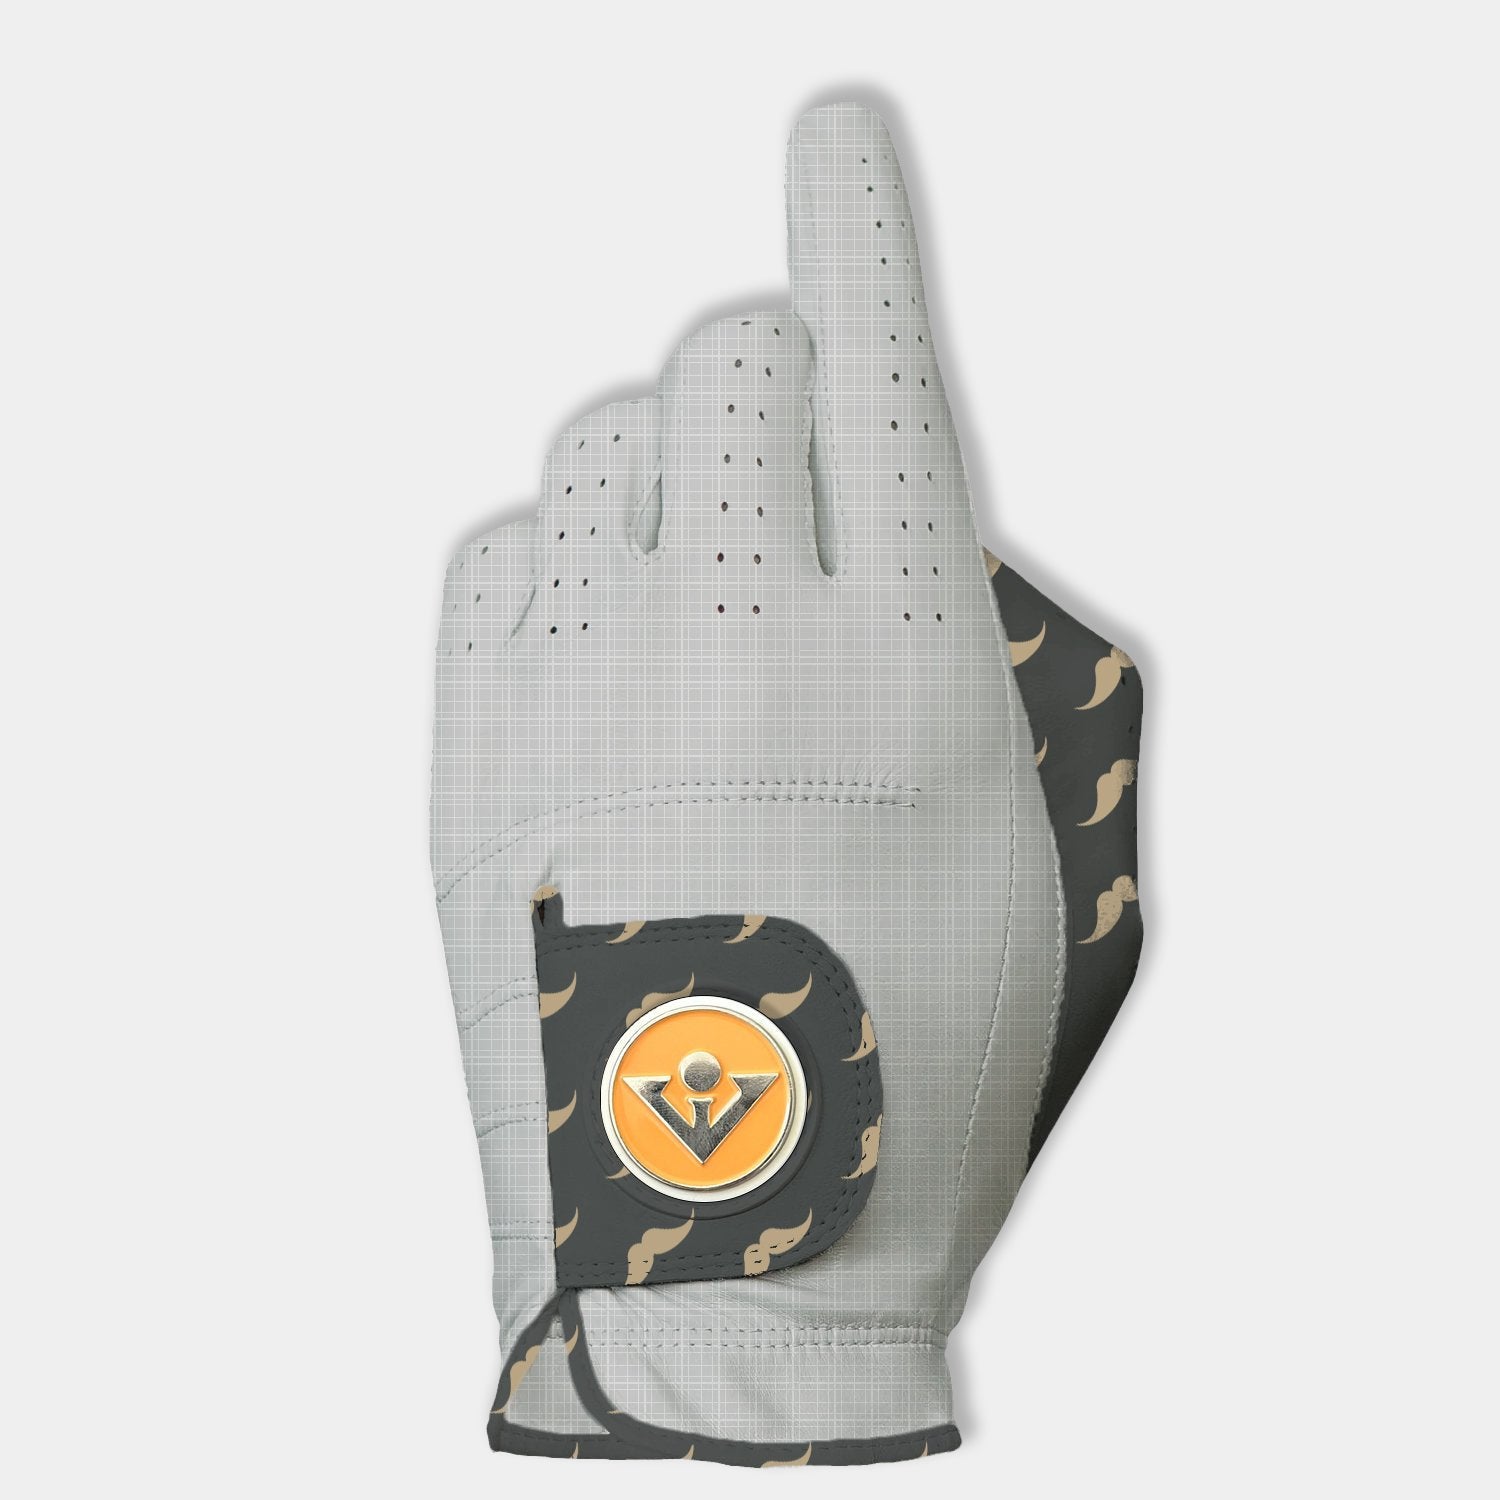 Colorful golf glove with designs for men and women